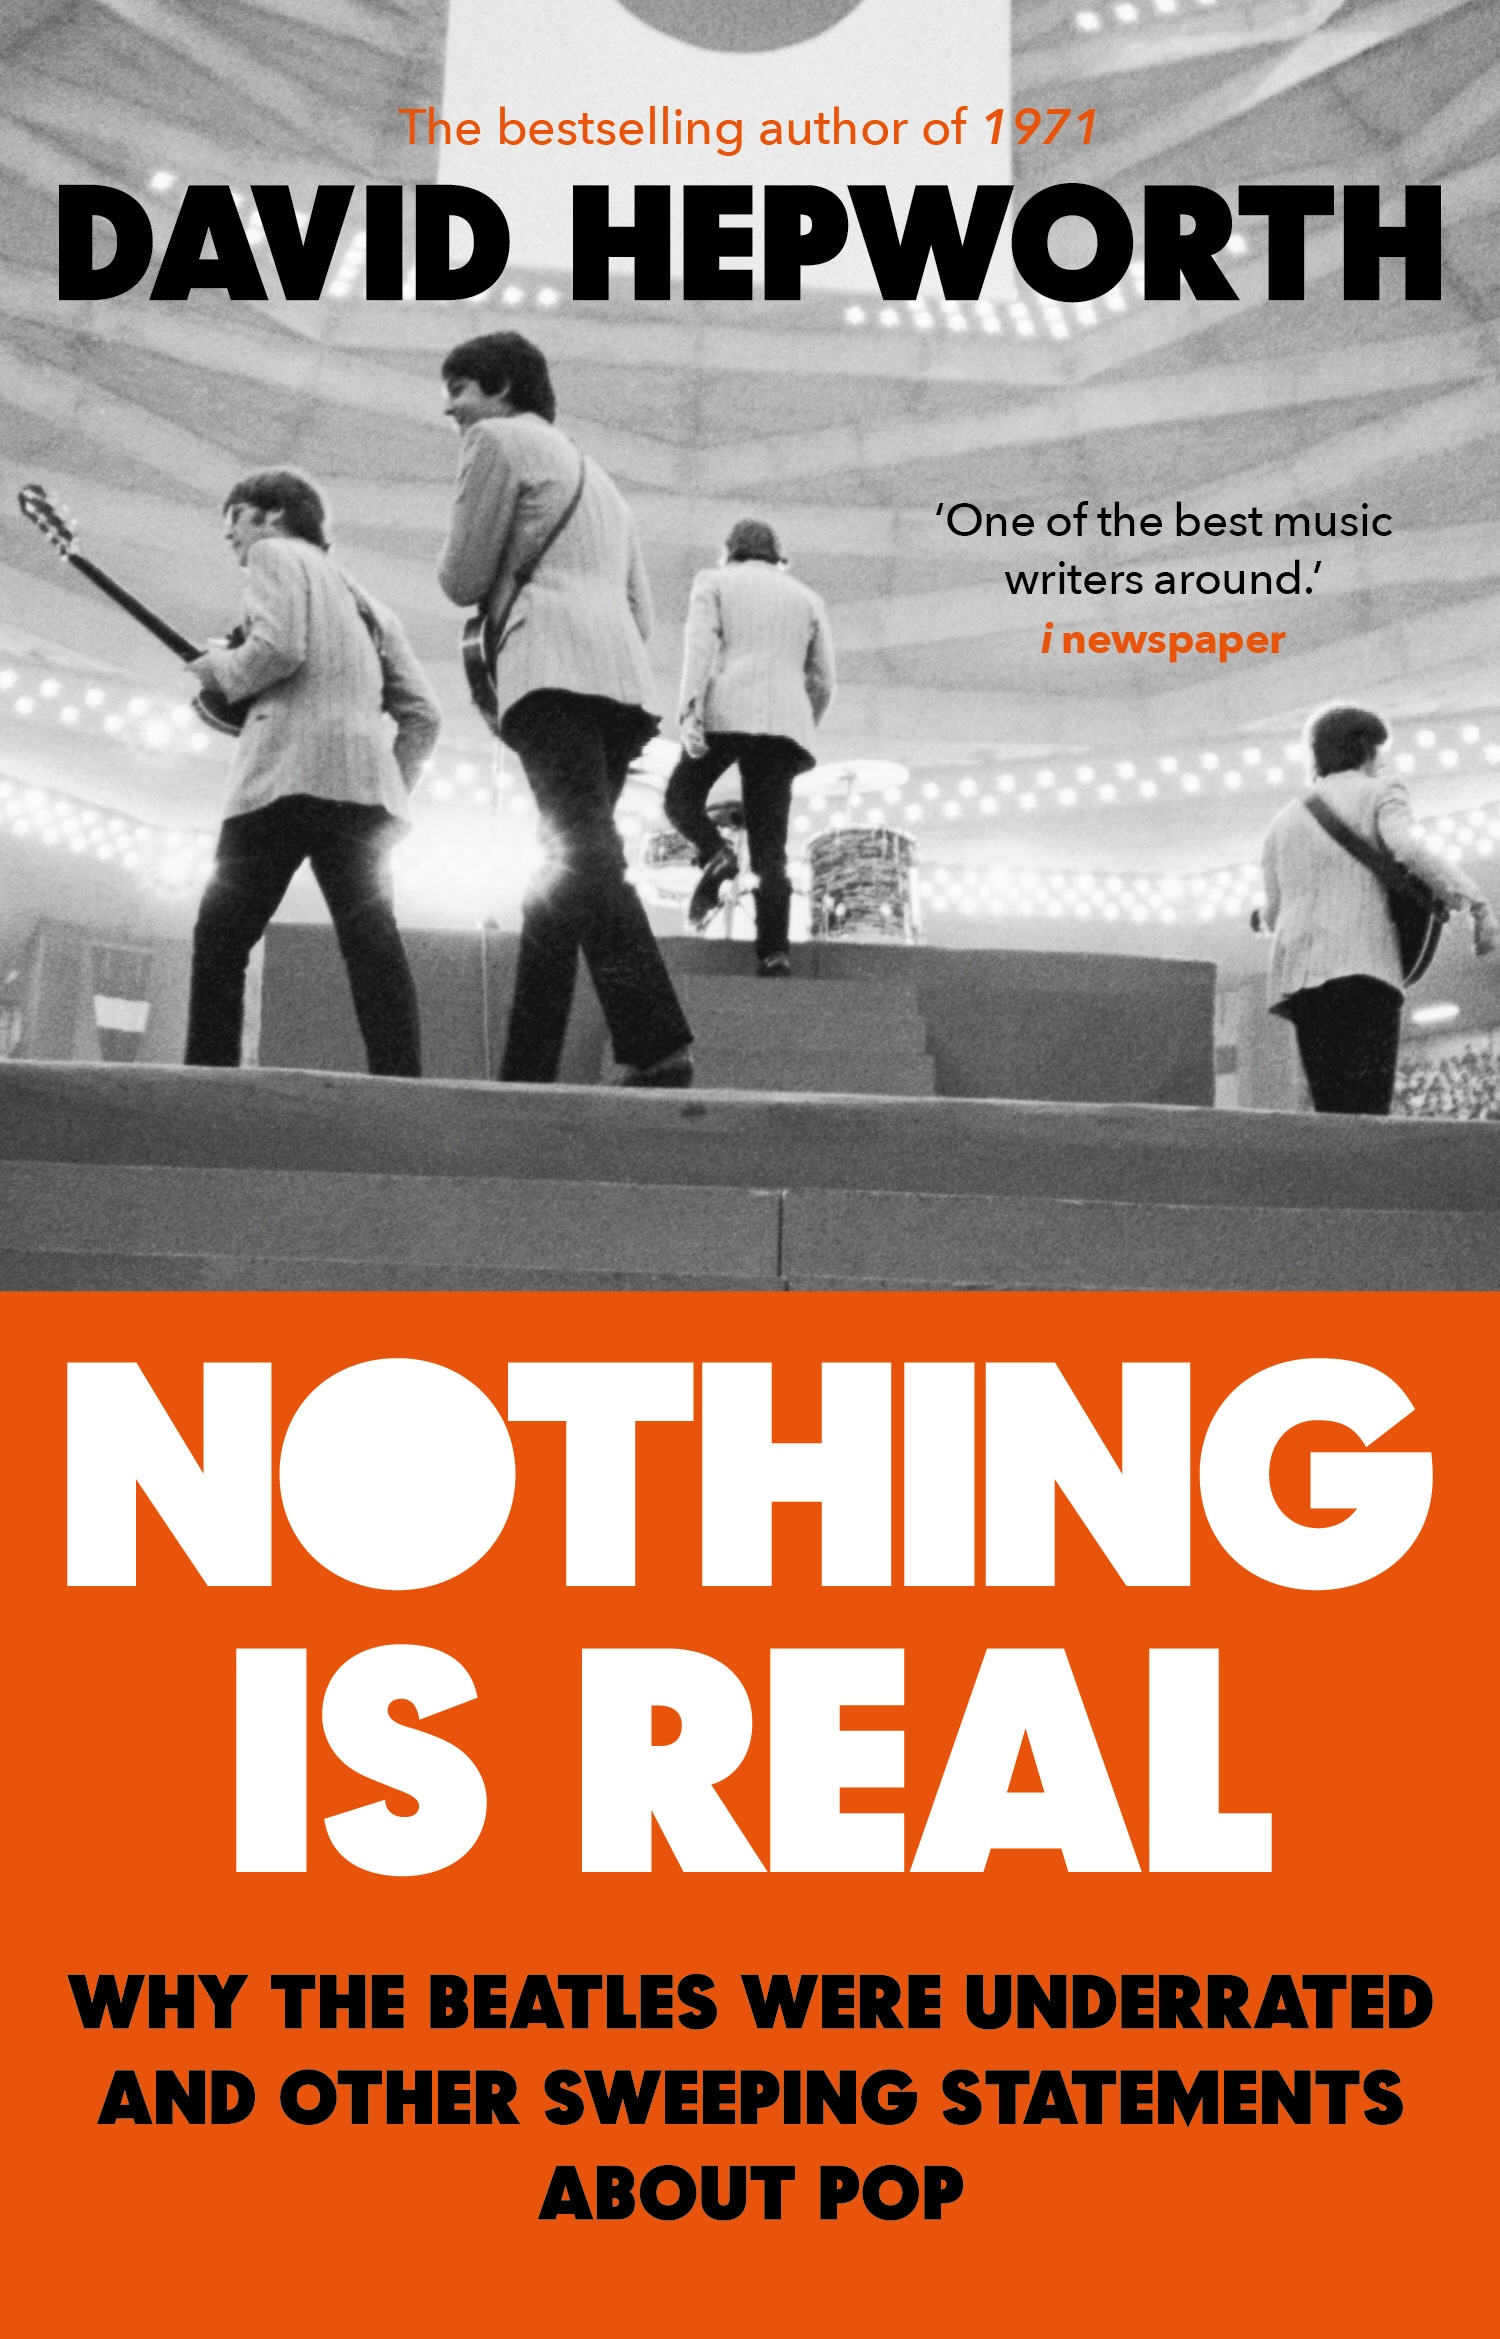 Book “Nothing is Real” by David Hepworth — March 21, 2019